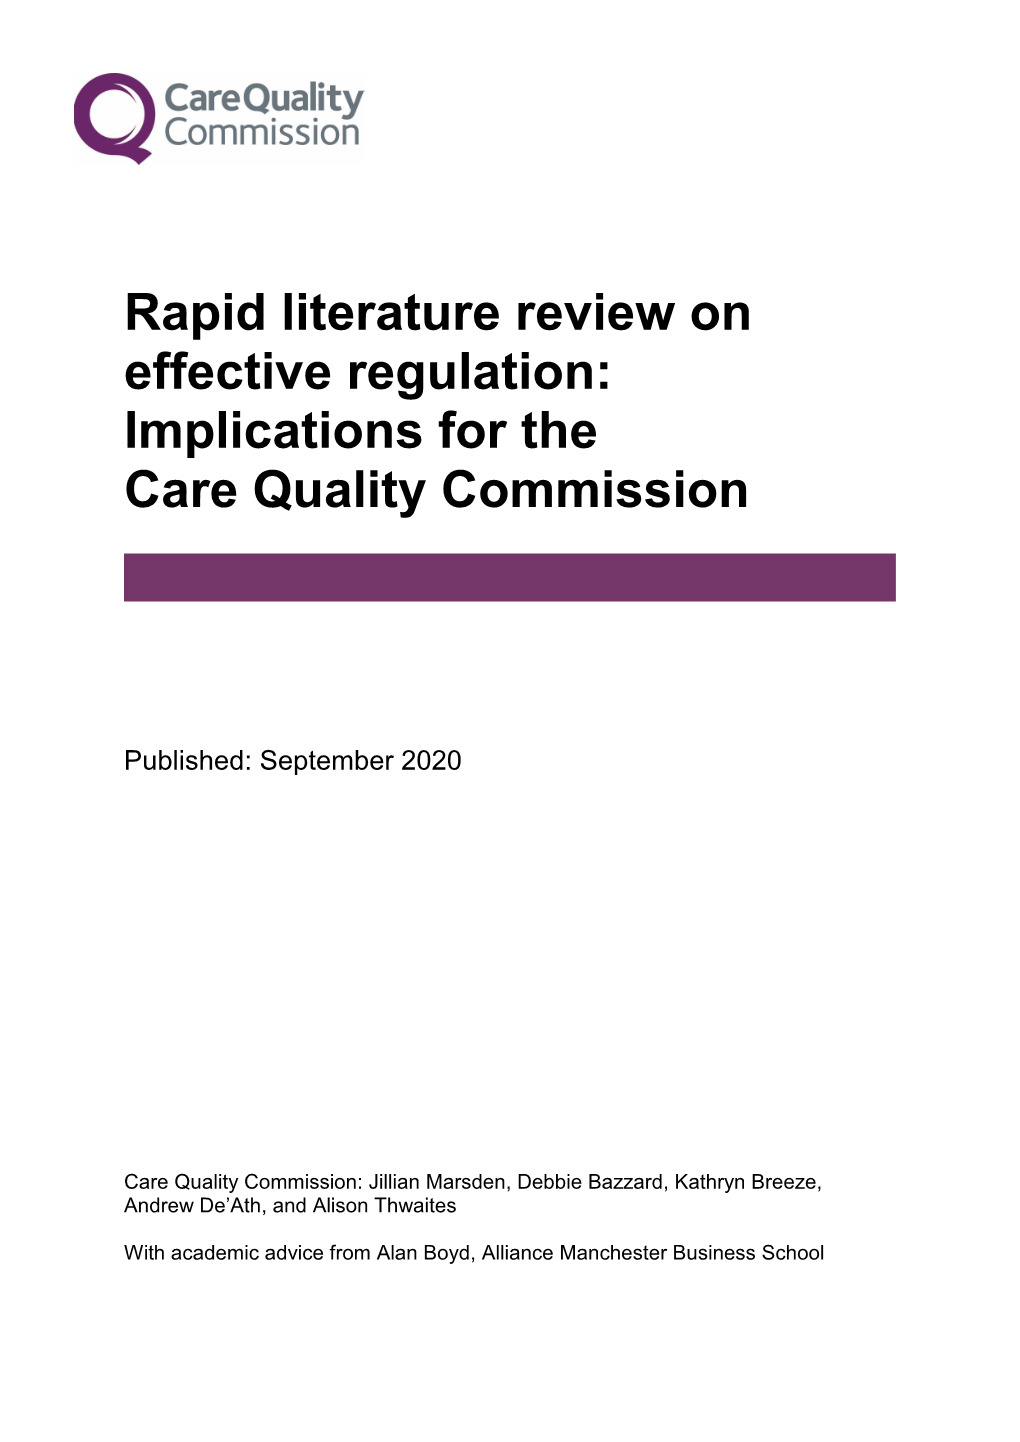 Rapid Literature Review on Effective Regulation: Implications for the Care Quality Commission